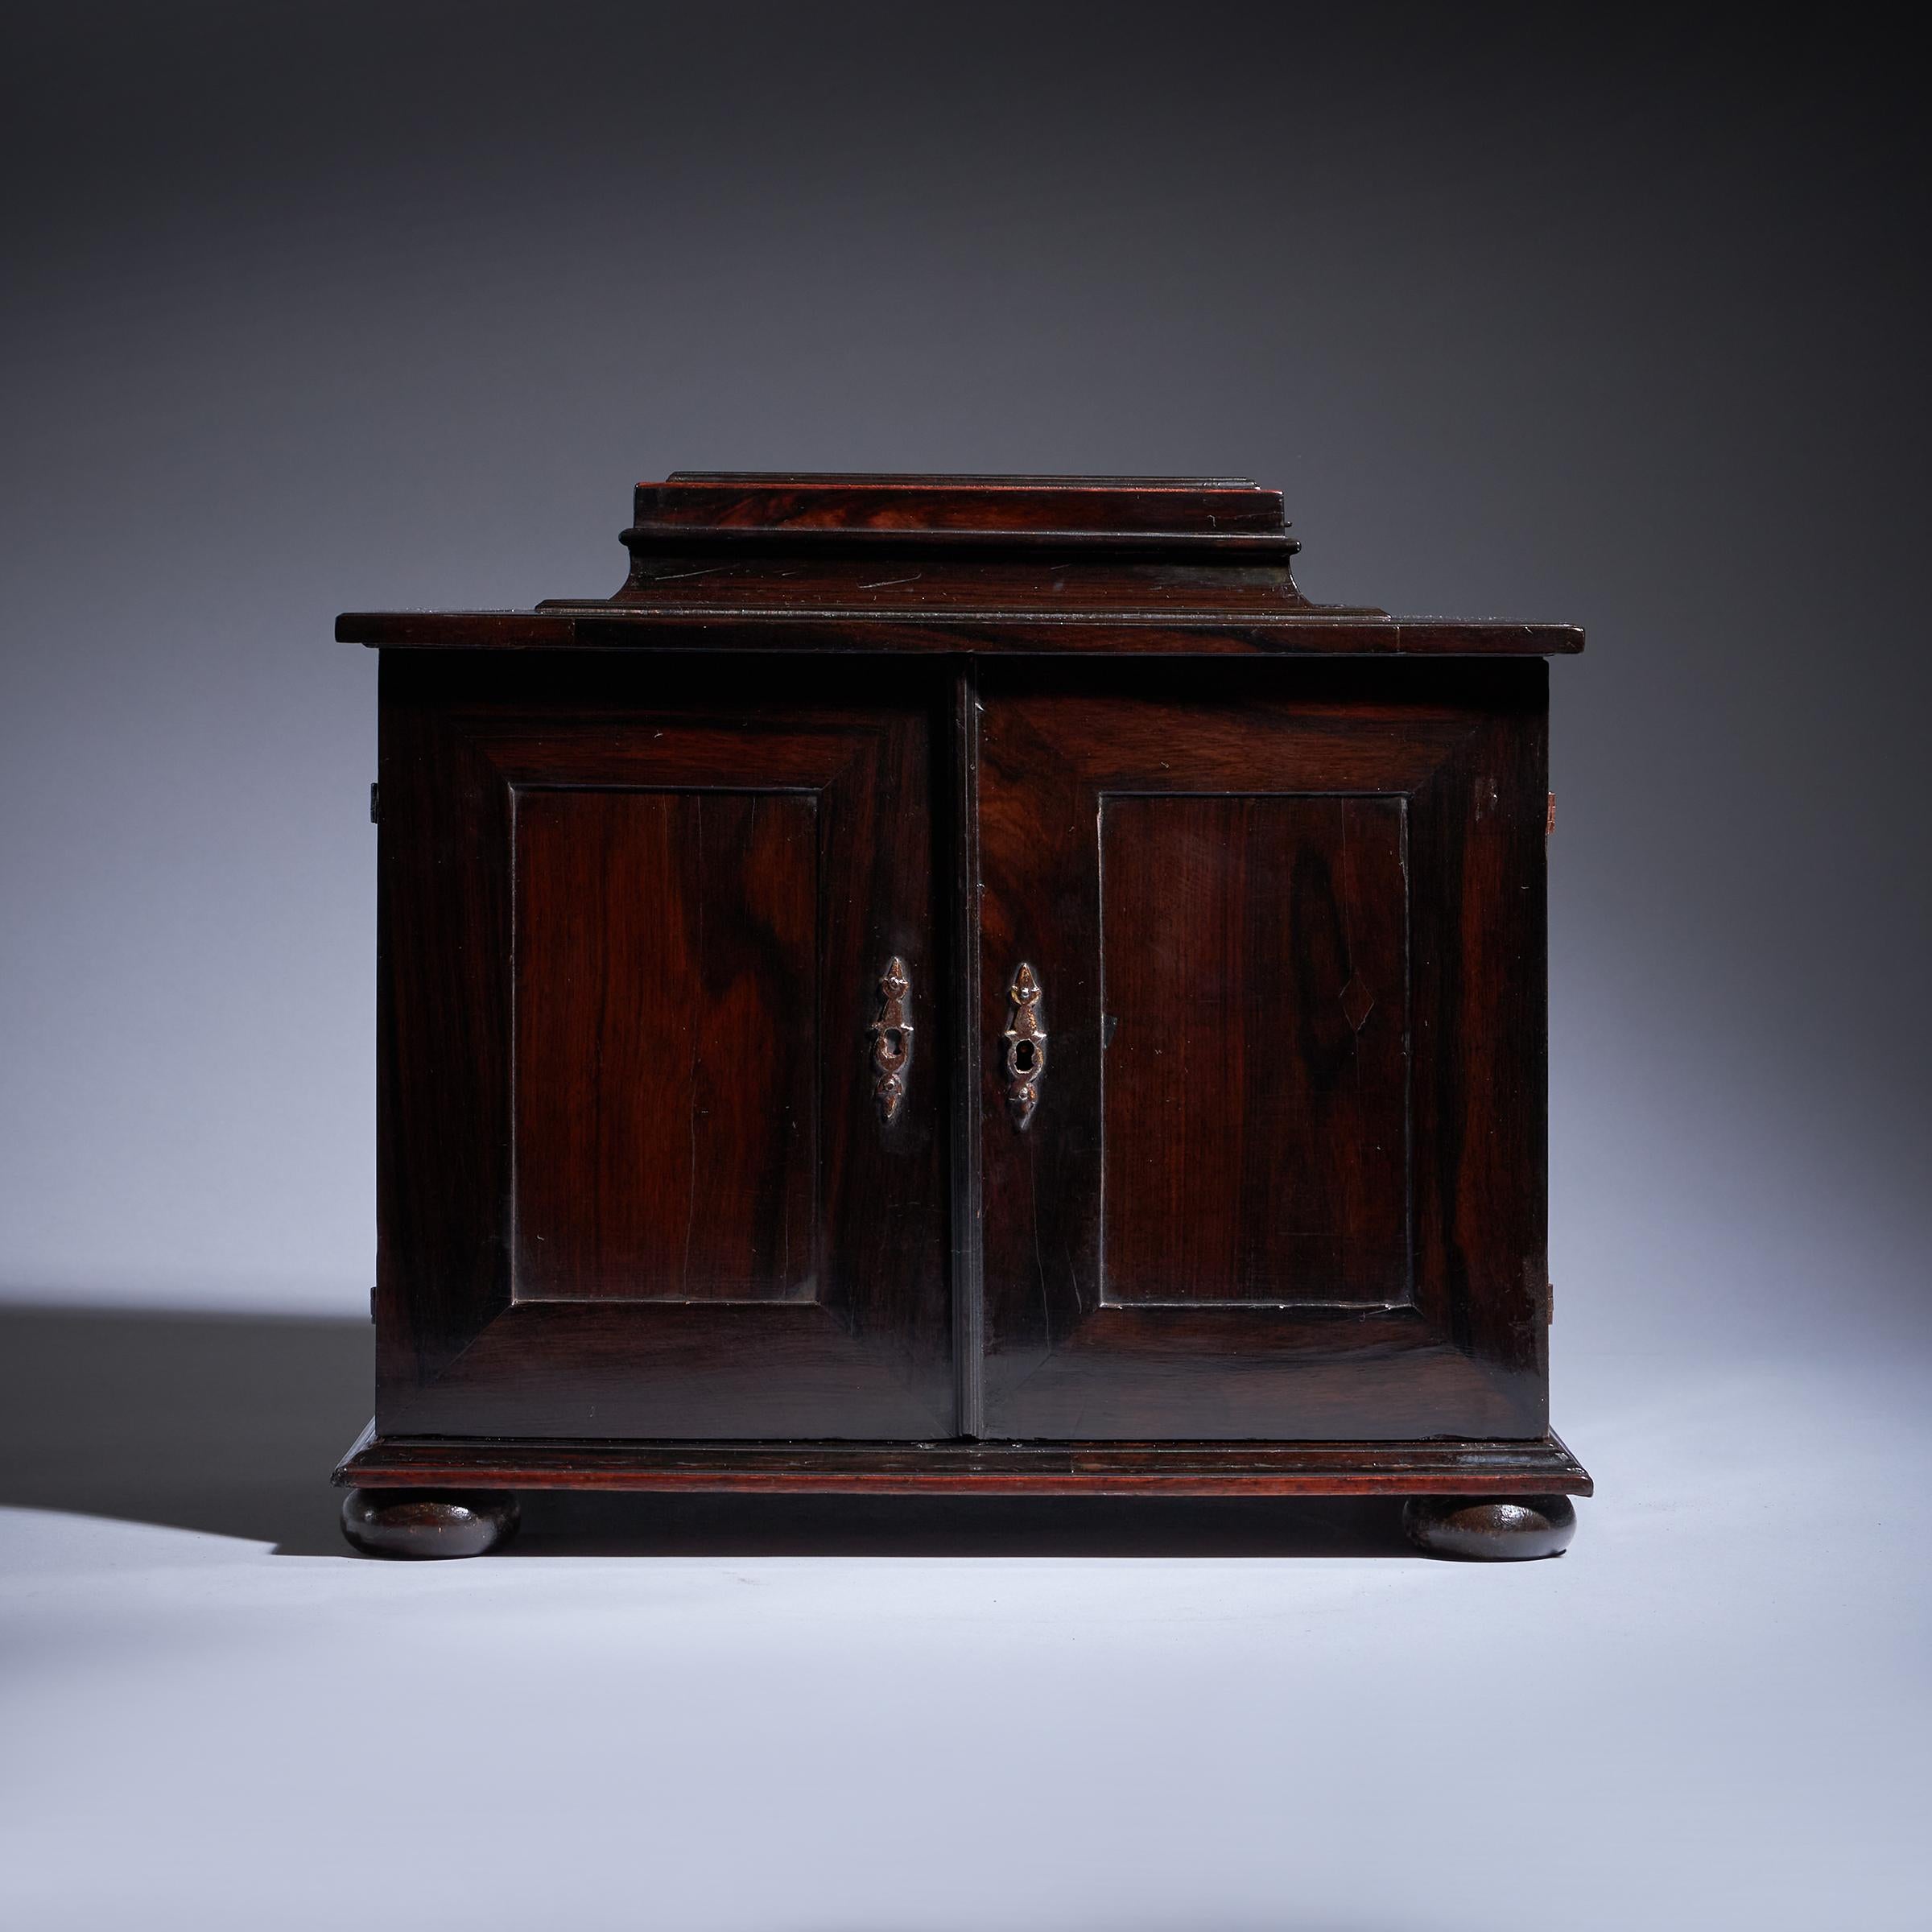 A fine and rare mid-17th century ebony veneered architectural table cabinet of diminutive proportions, circa 1640. Augsuerg. 

The moulded ebony veneered cabinet is surmounted with a gable concealing a hidden compartment accessed via a neat sprung